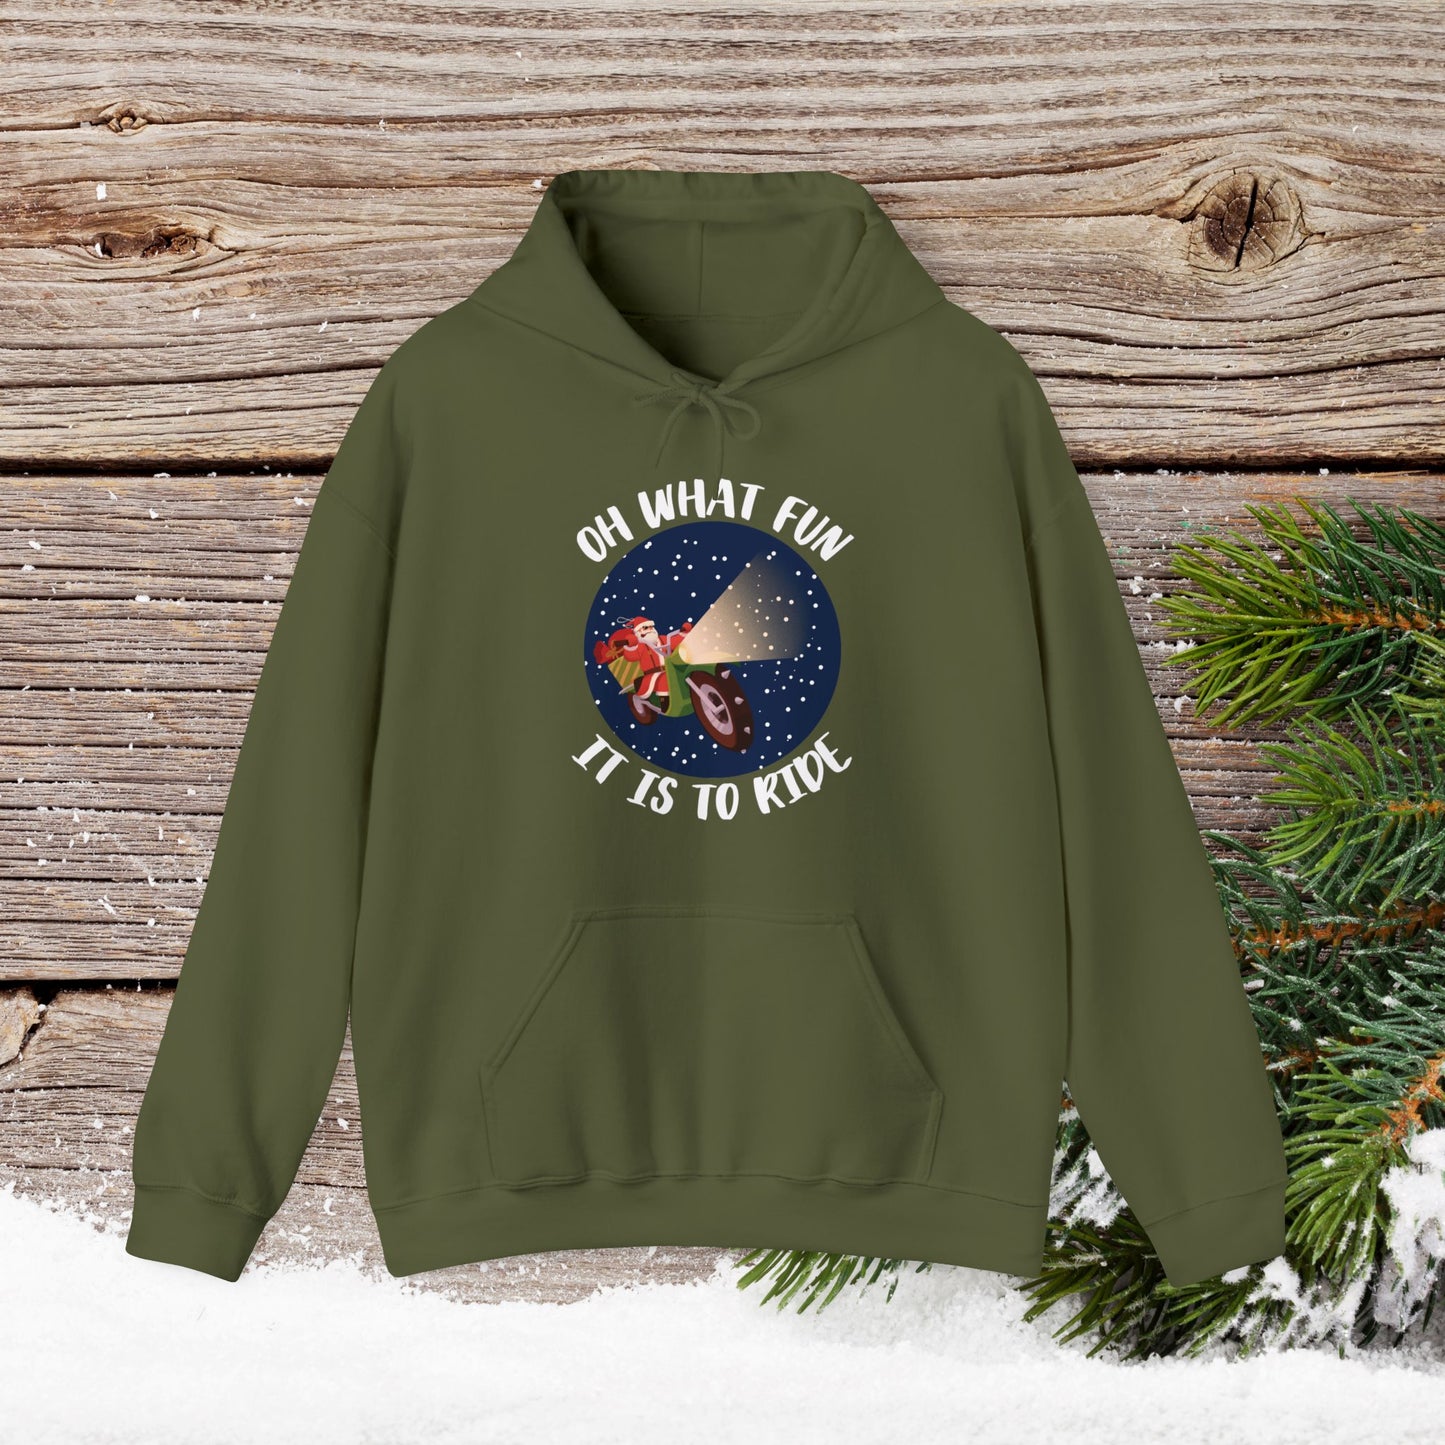 Christmas Hoodie - Oh What Fun It Is To Ride - Mens and Boys Christmas Shirts - Youth and Adult Christmas Hooded Sweatshirt Hooded Sweatshirt Graphic Avenue Military Green Adult Small 